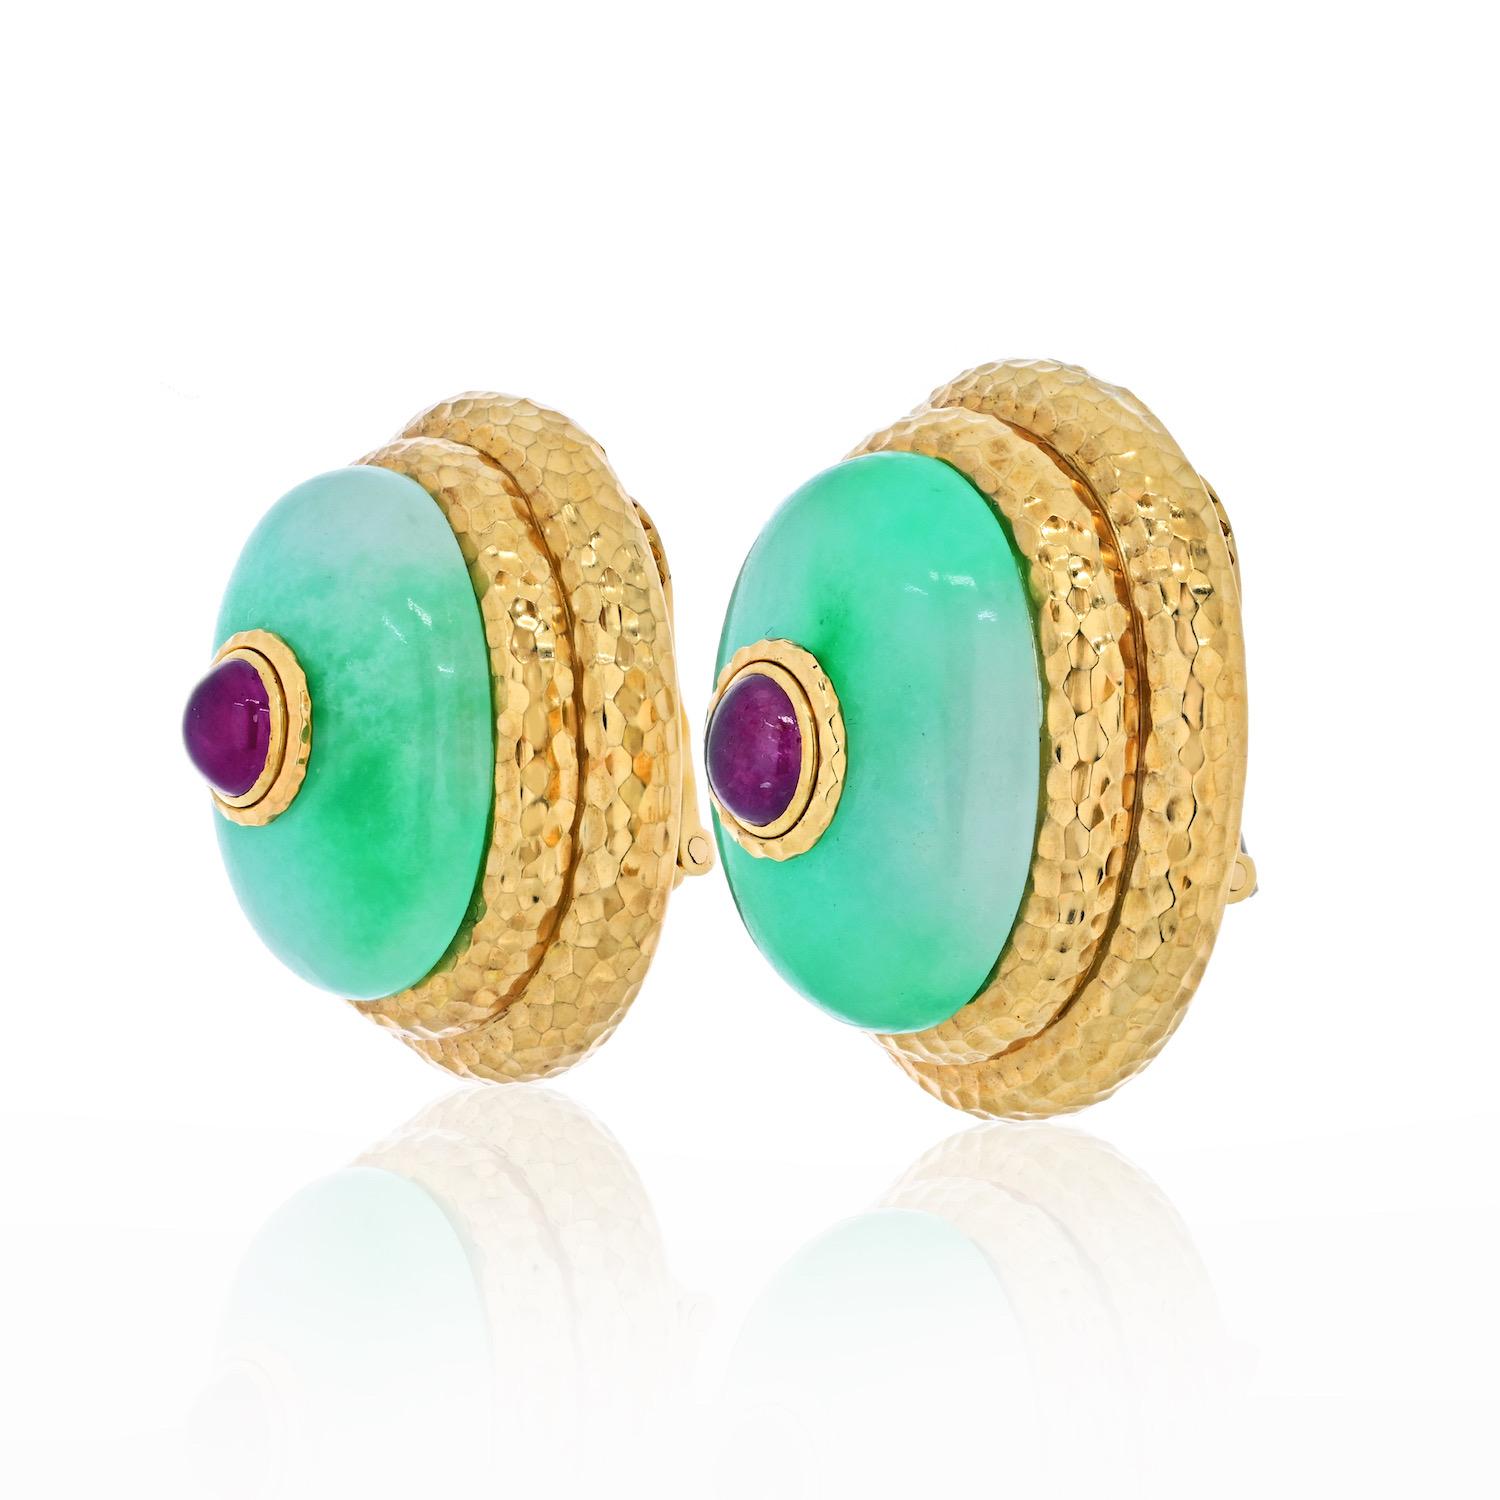 Absolutely spectacular these oversized jade earrings will make all heads turn they are that gorgeous!
We love the apple color green and the dome surface of the clip. Each earring is accented with a cabochon ruby in the center and enclosed in a